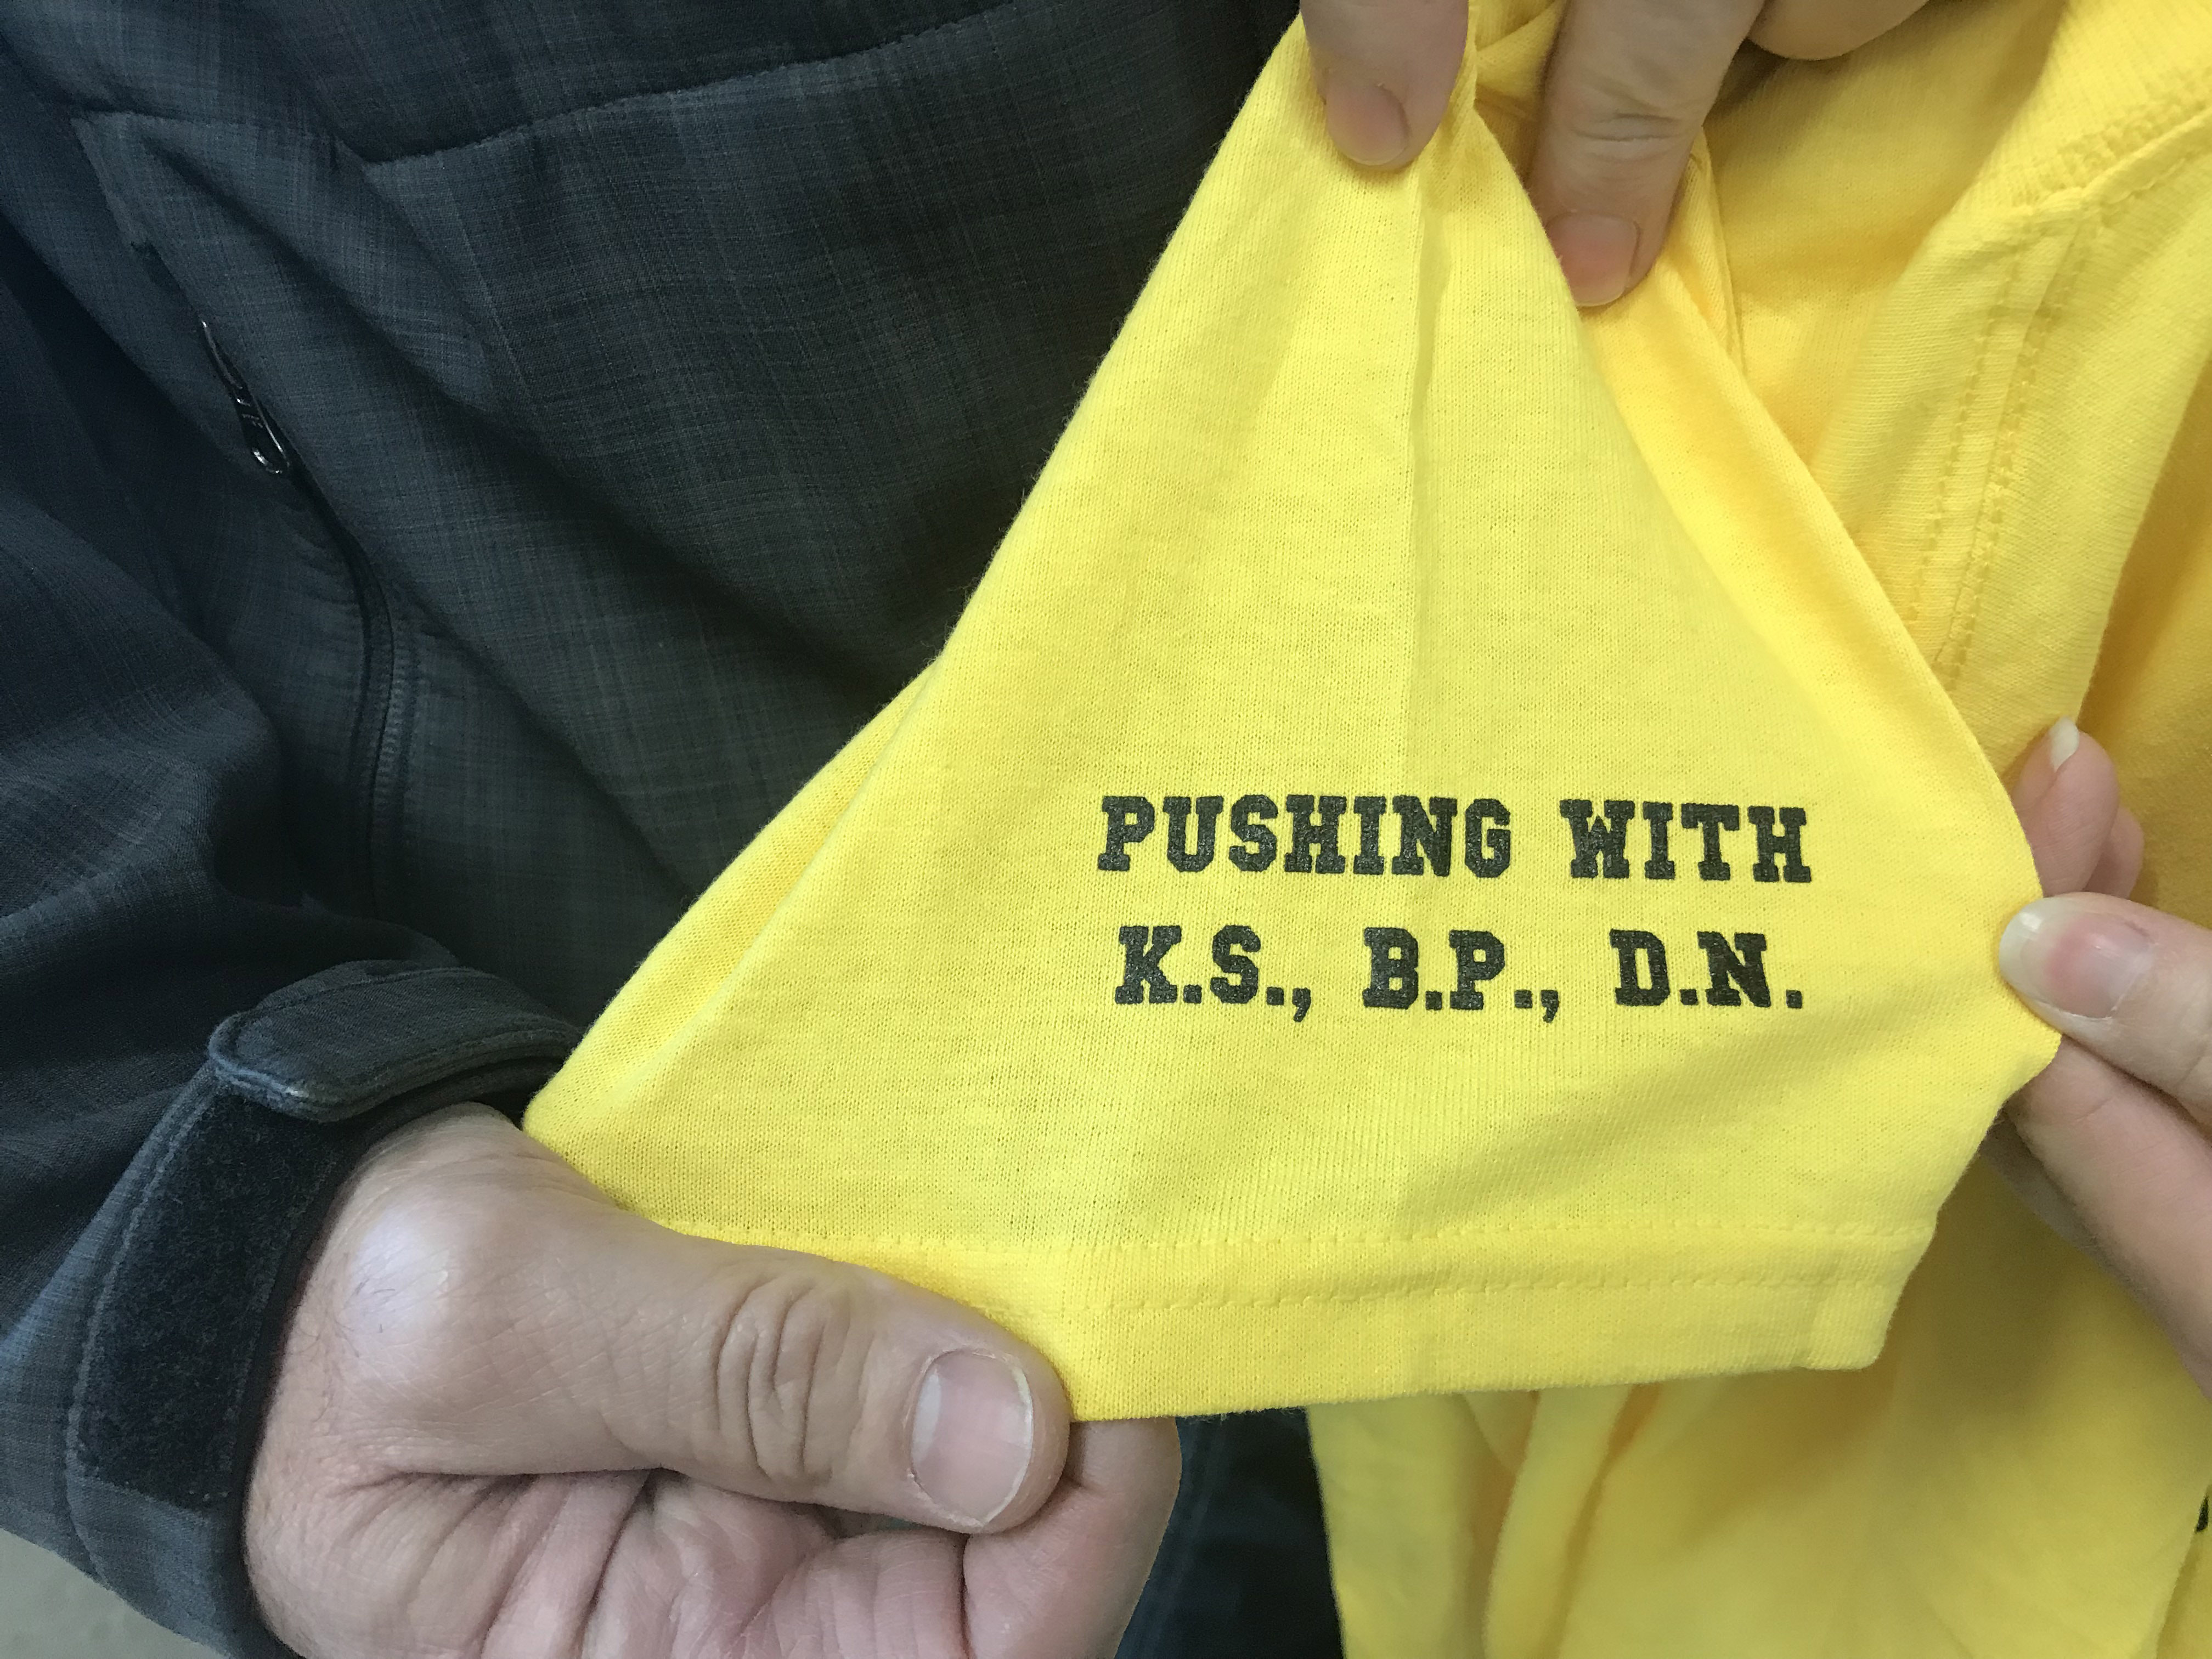 The 2018 Bedpush shirt paid tribute to three students that recently passed.